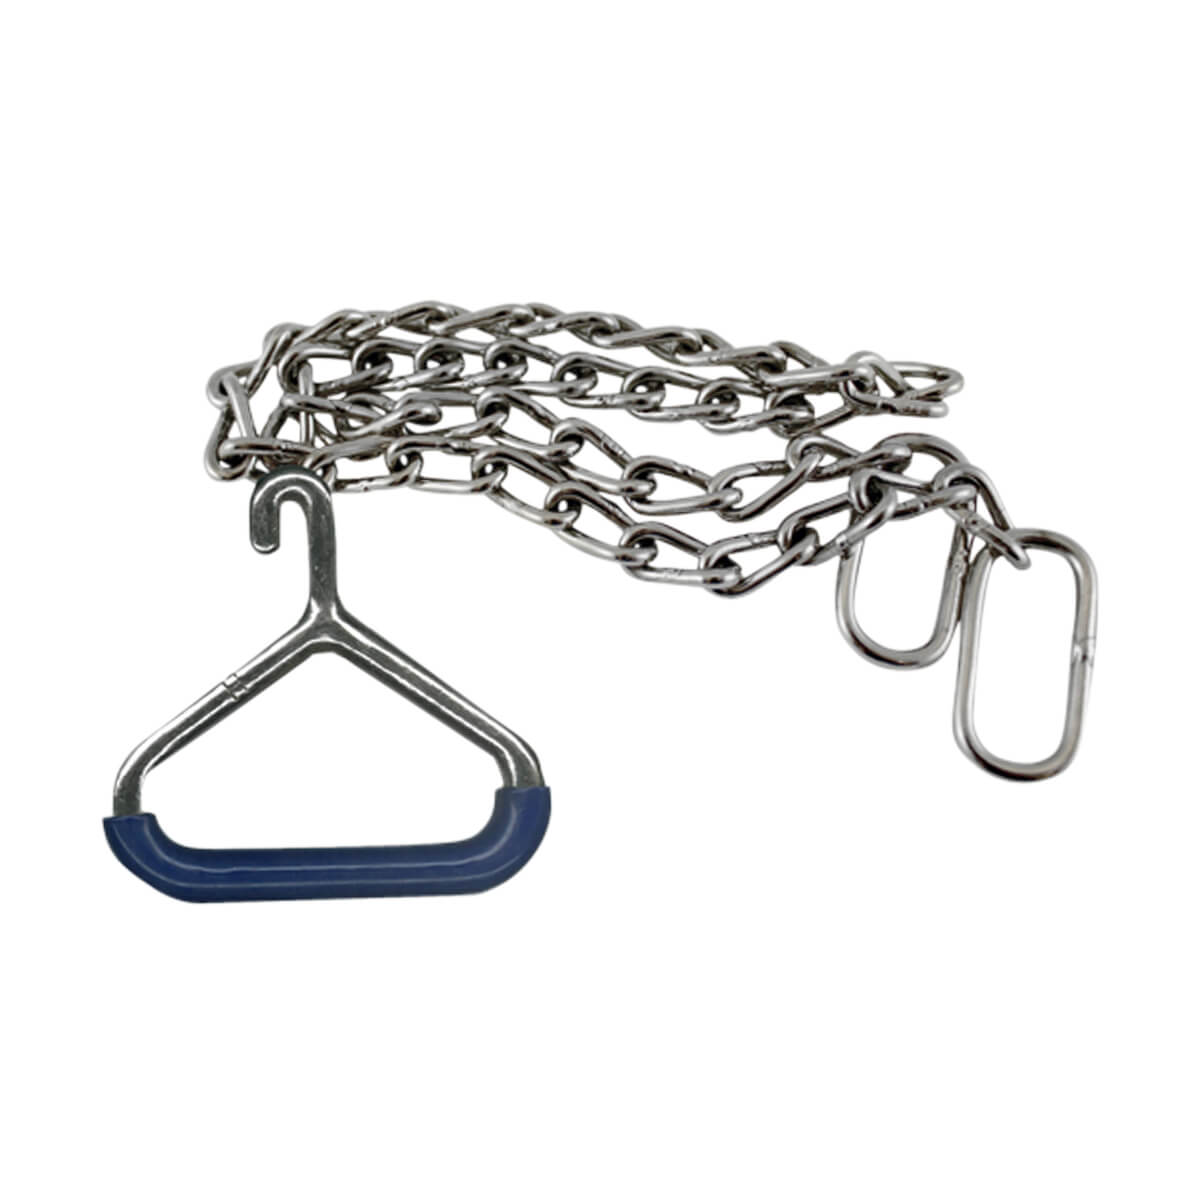 OB Chain Handle with Chain - 60-in